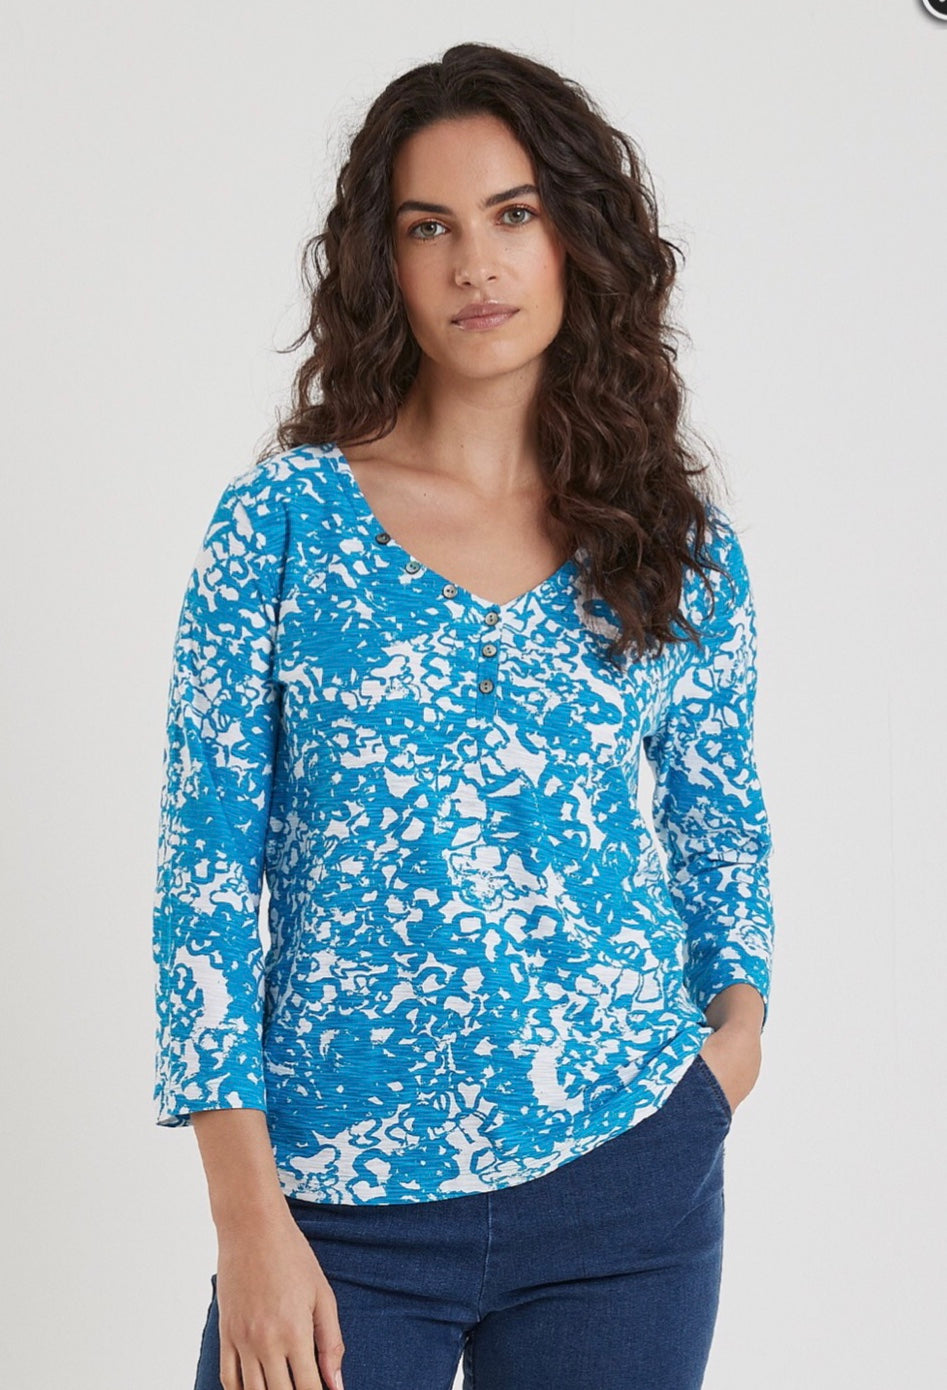 Scribble Print Holly Top - Blue/White